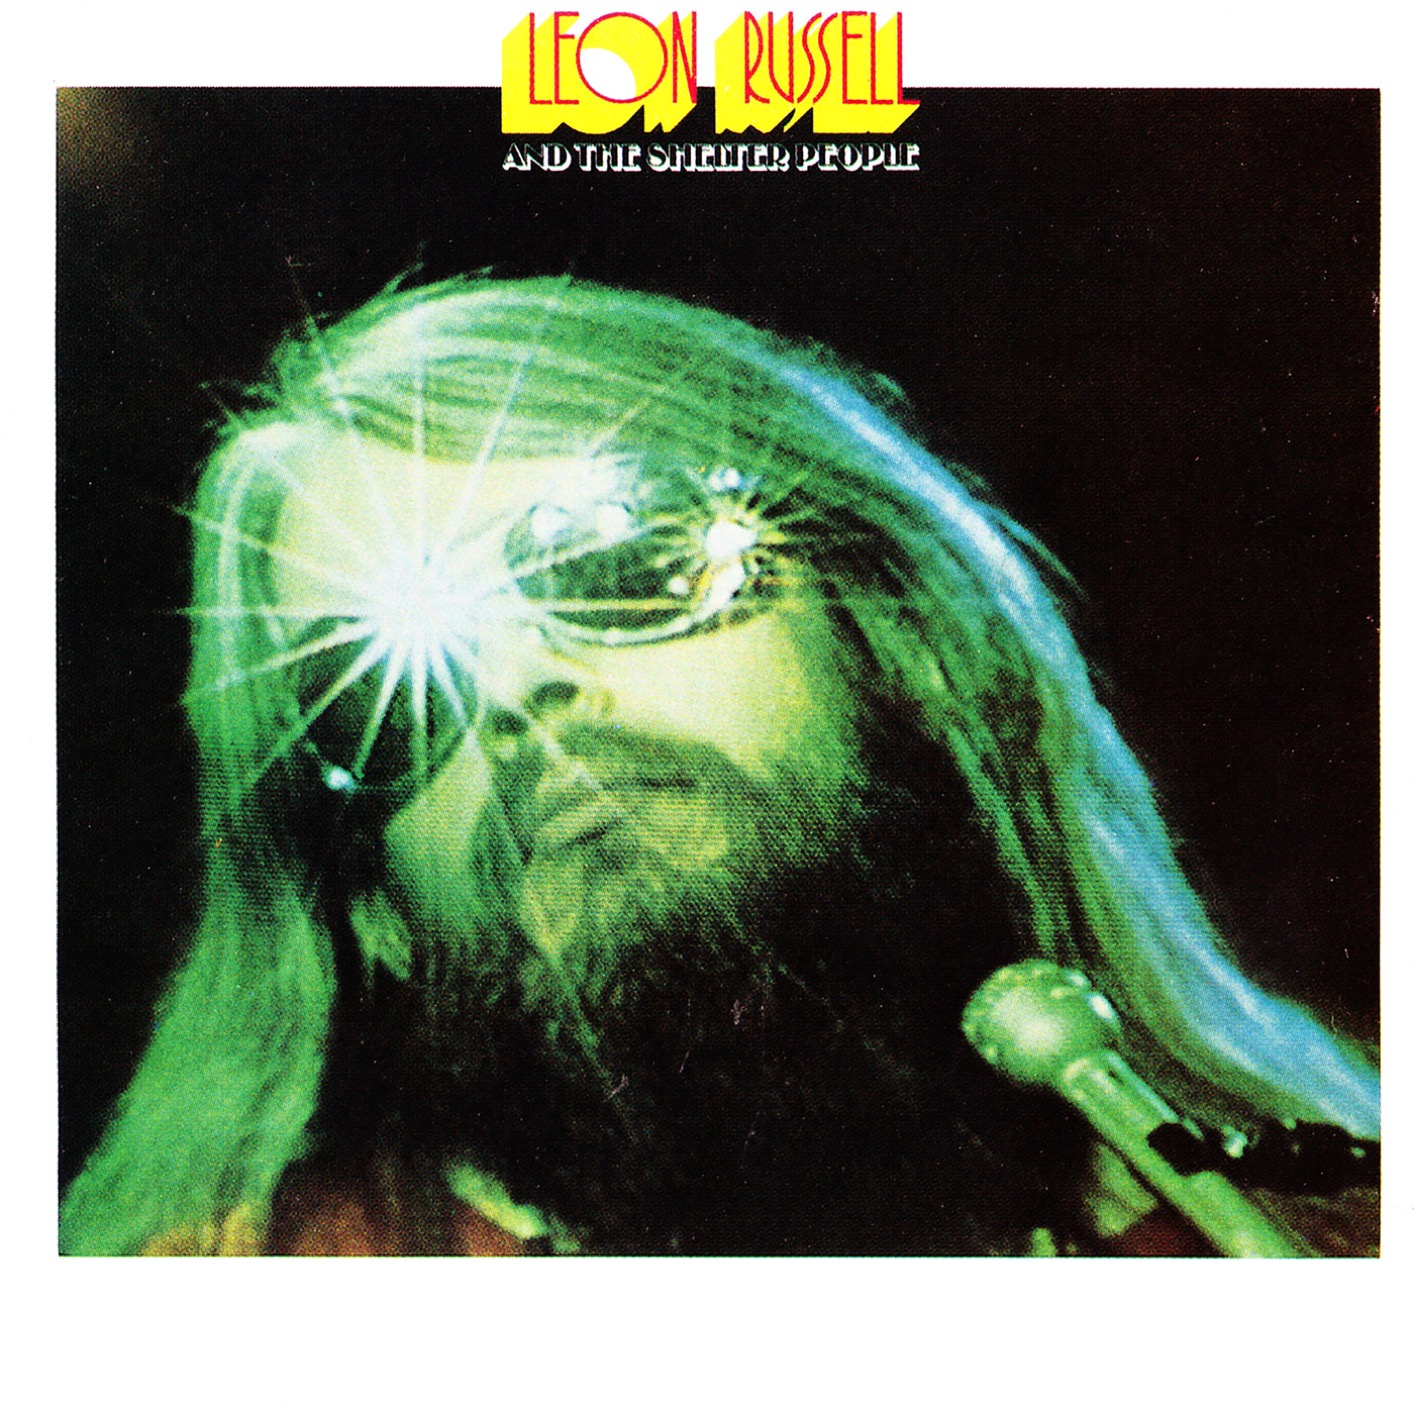 Leon Russell – Leon Russell And The Shelter People (1971/2013/2019) [FLAC 24bit/96kHz]